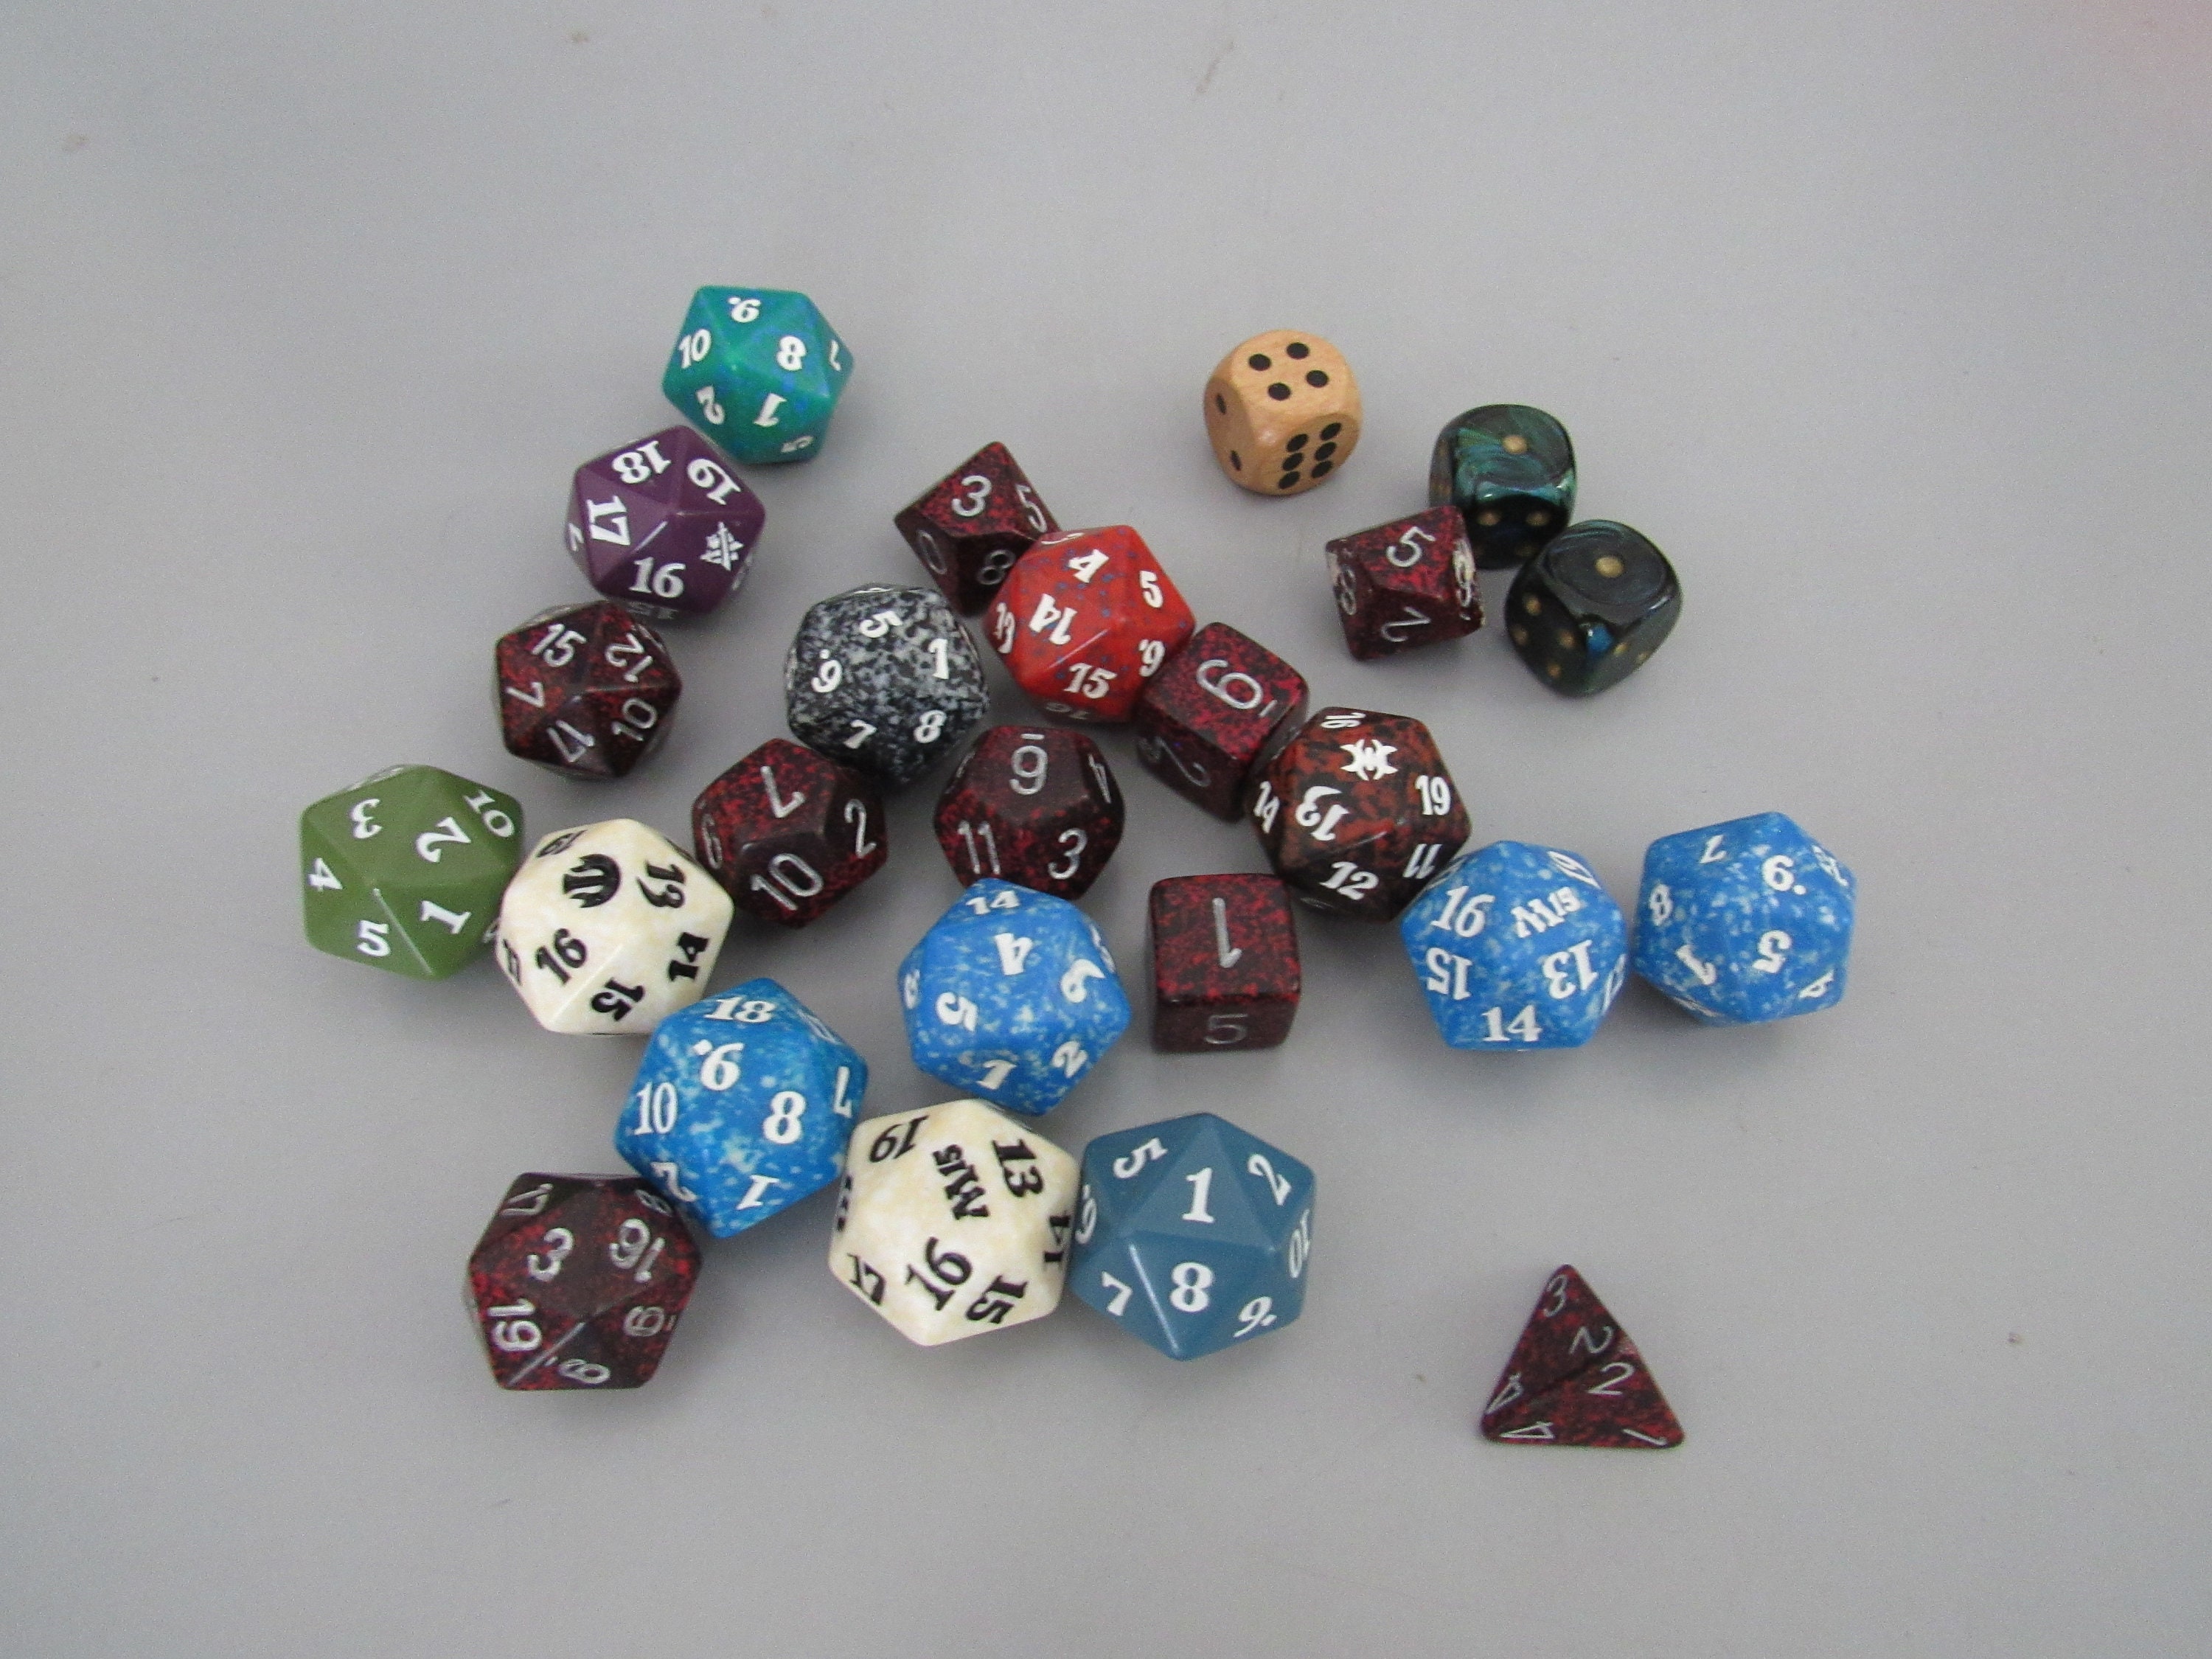 NEW Lot 144 Mini Vintage Dice Red Yellow Blue Butterscotch Green RPG D&D Liar's 